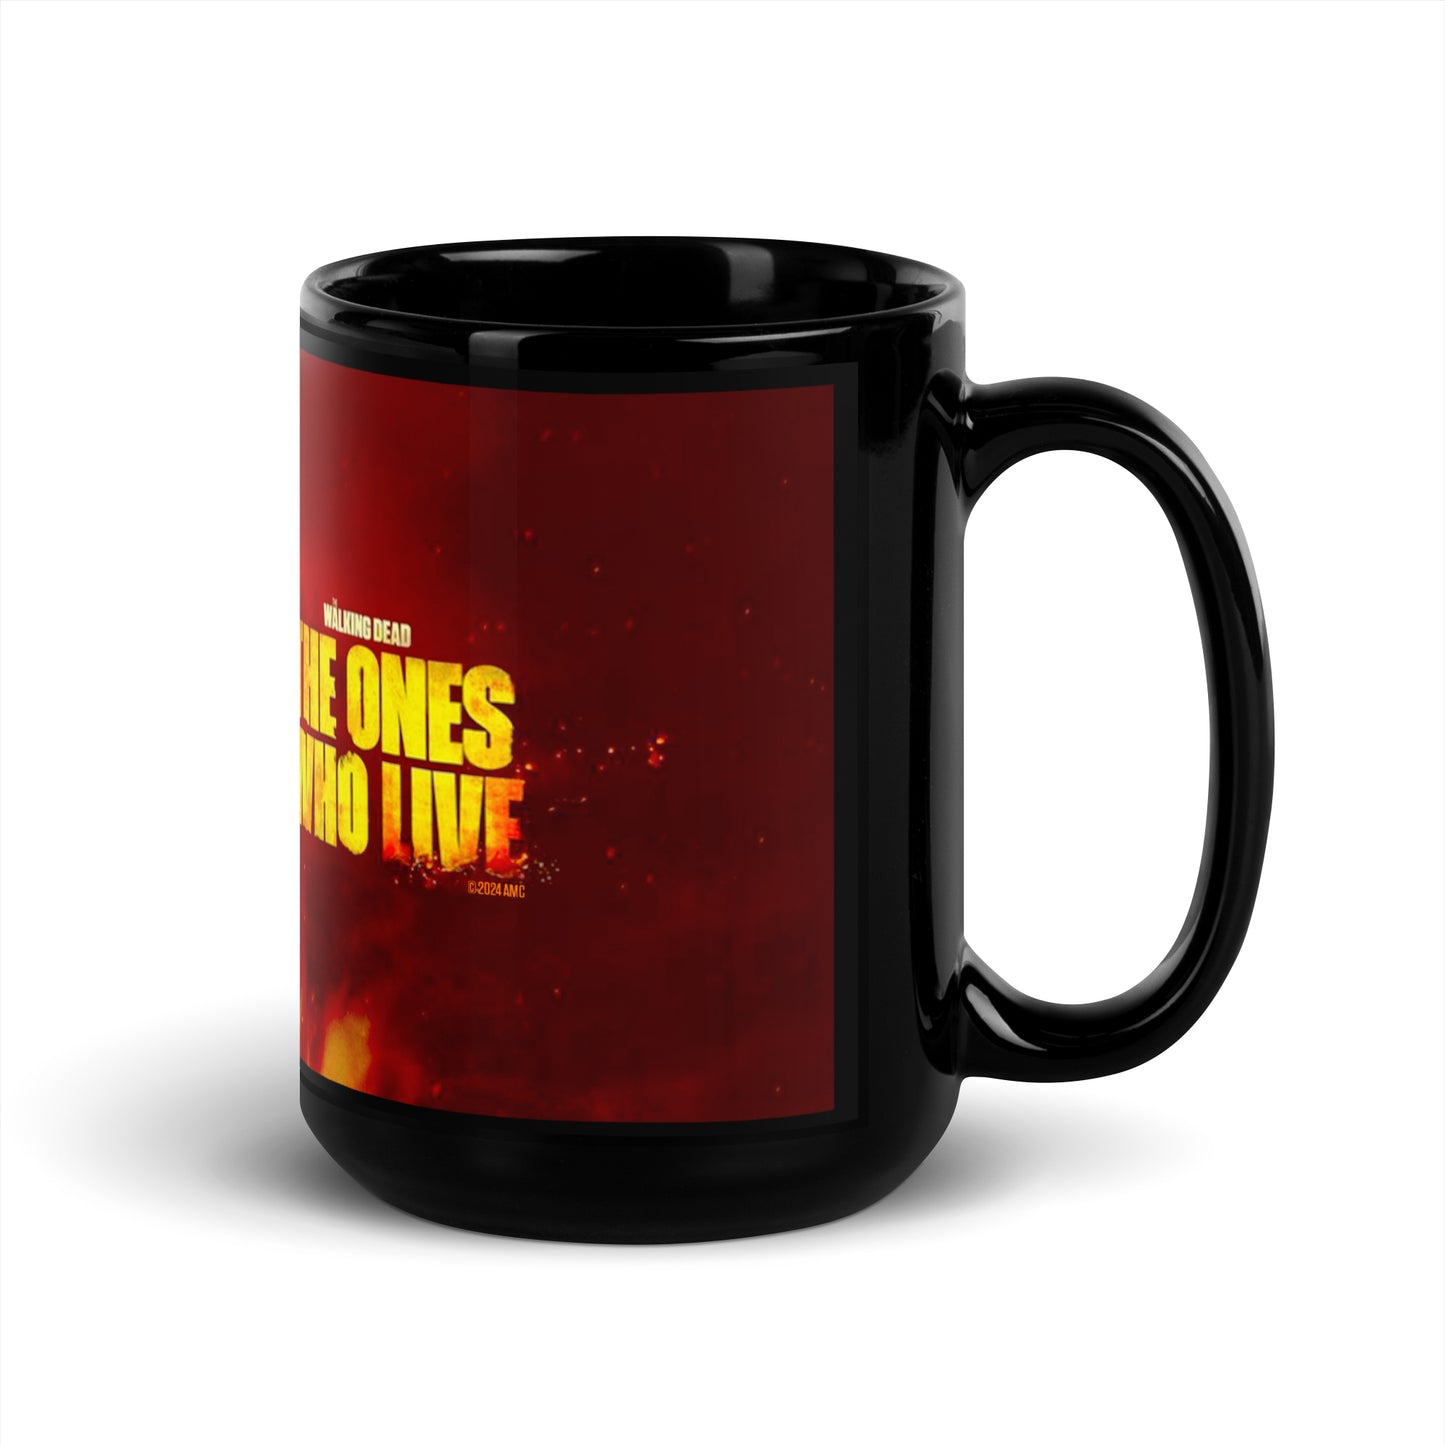 The Walking Dead: The Ones Who Live Mug